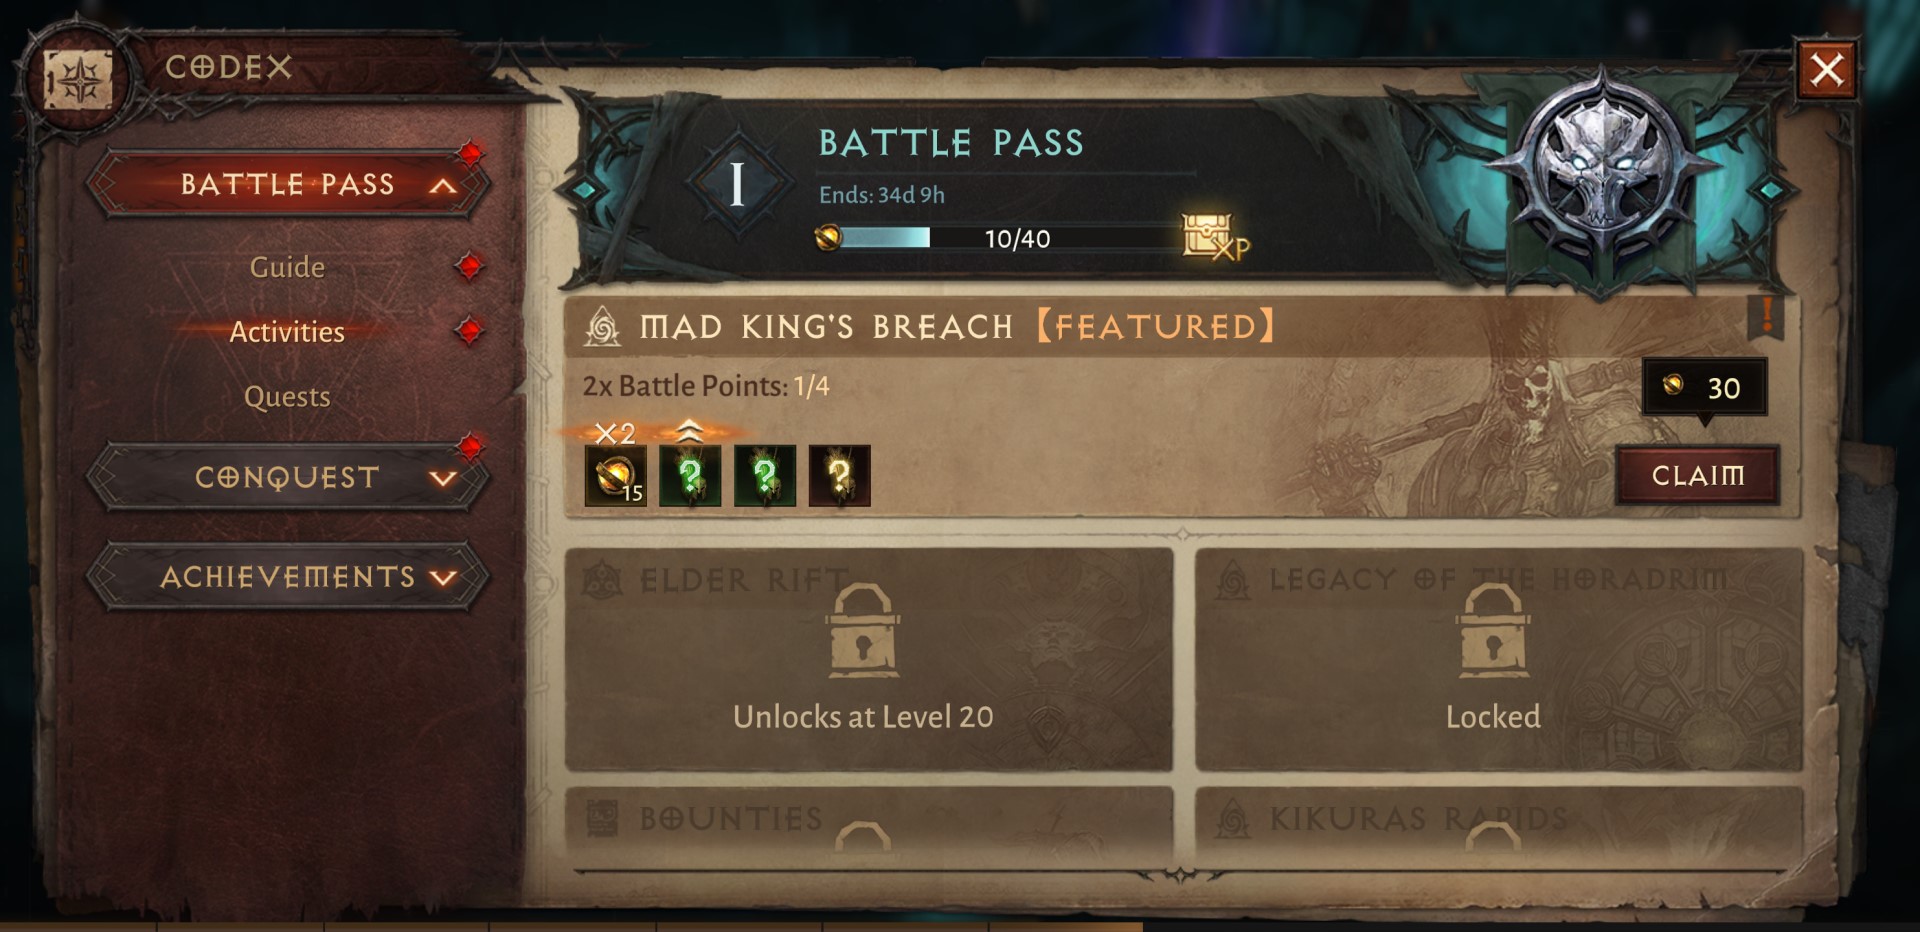 The Codex page in Diablo Immortal showing a new reward to claim